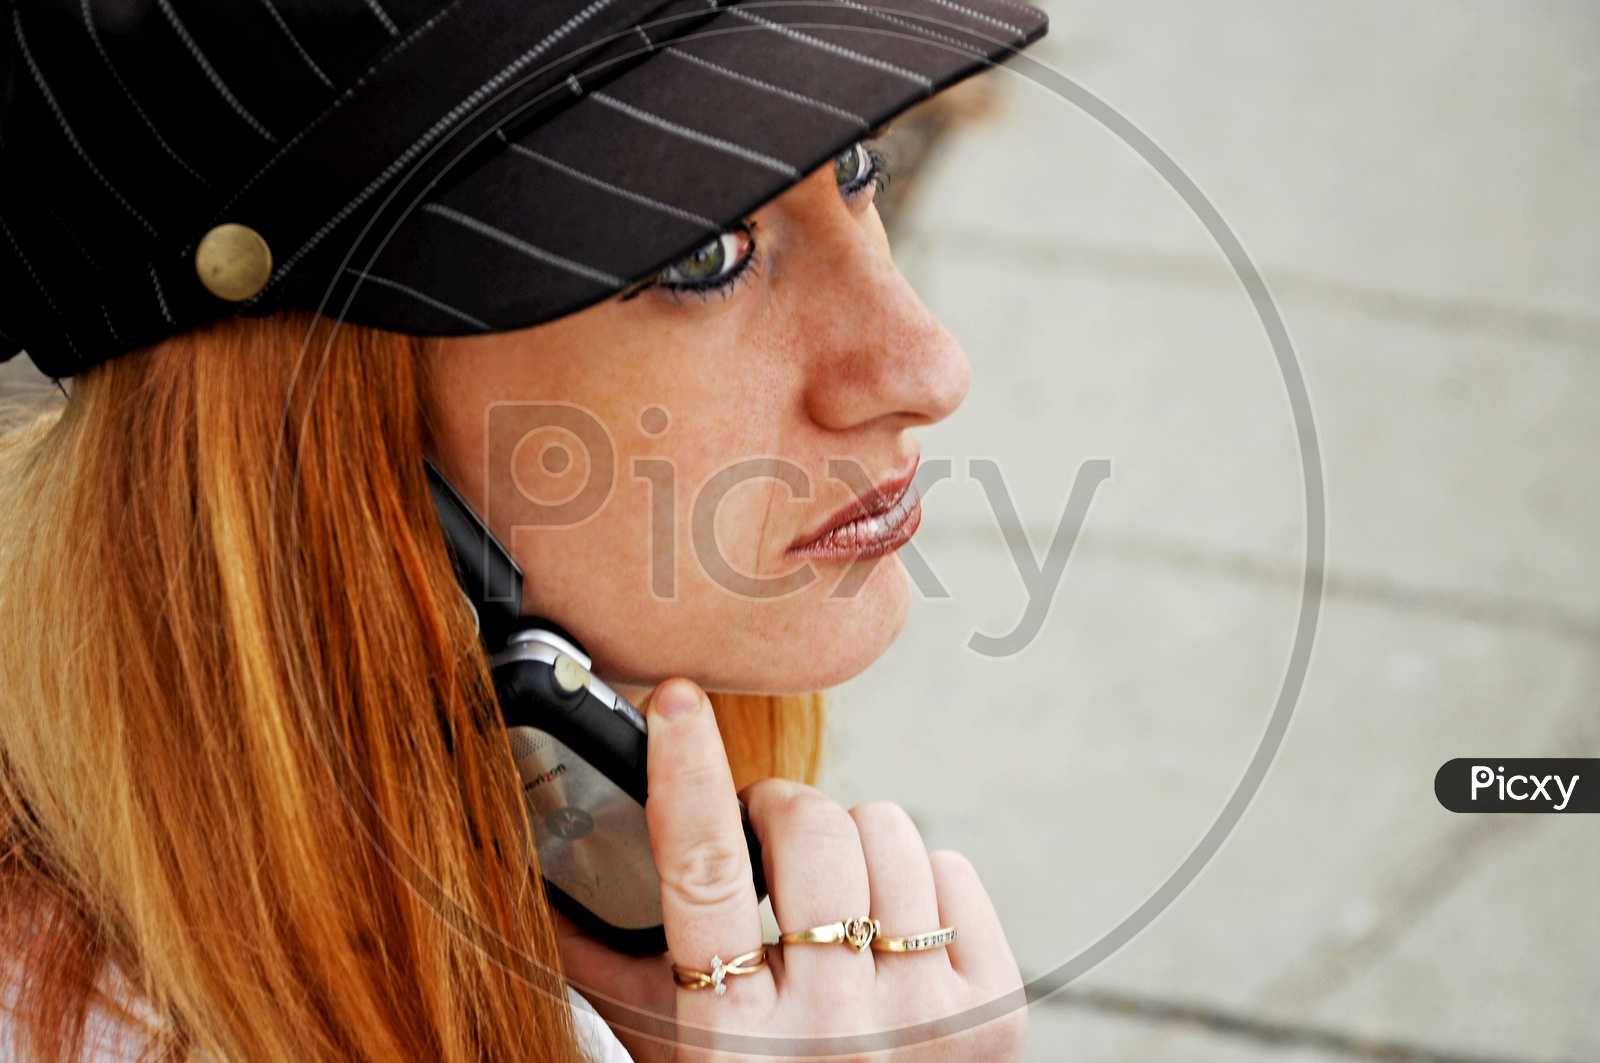 A blonde woman talking over the phone